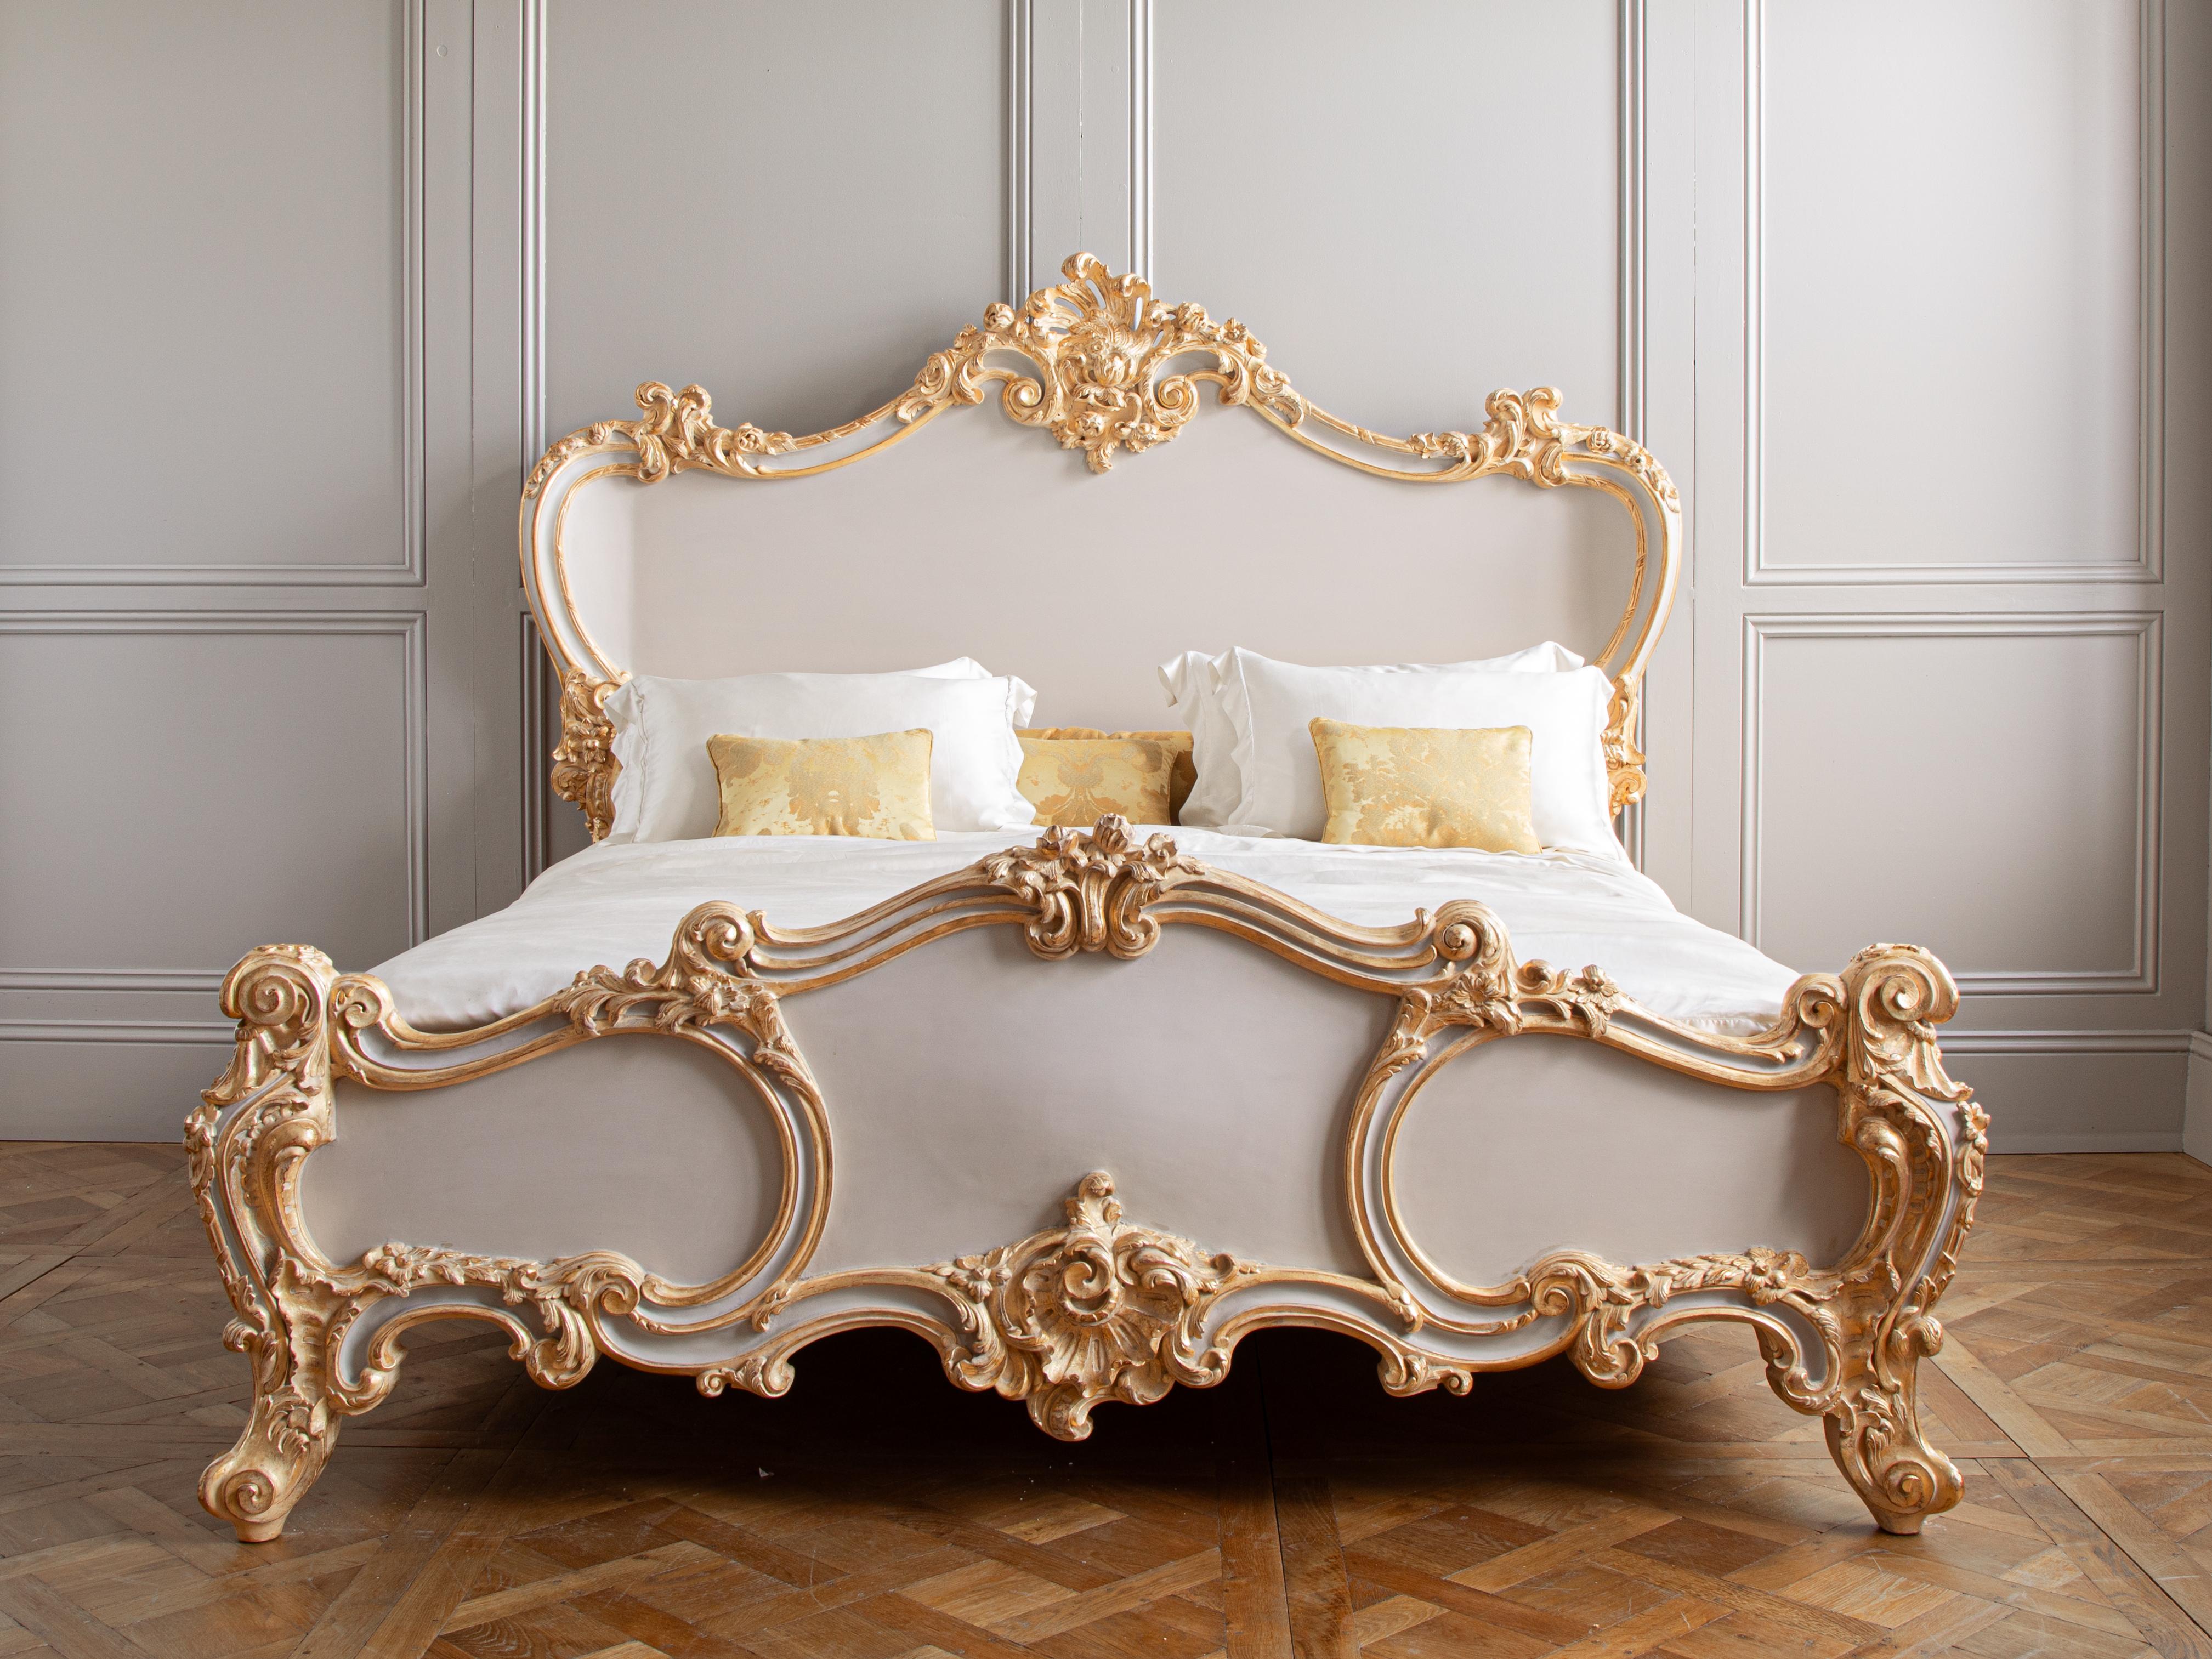 Hand-Carved The Cherub Bed By La Maison London With Gold Highlights - UK Super King For Sale